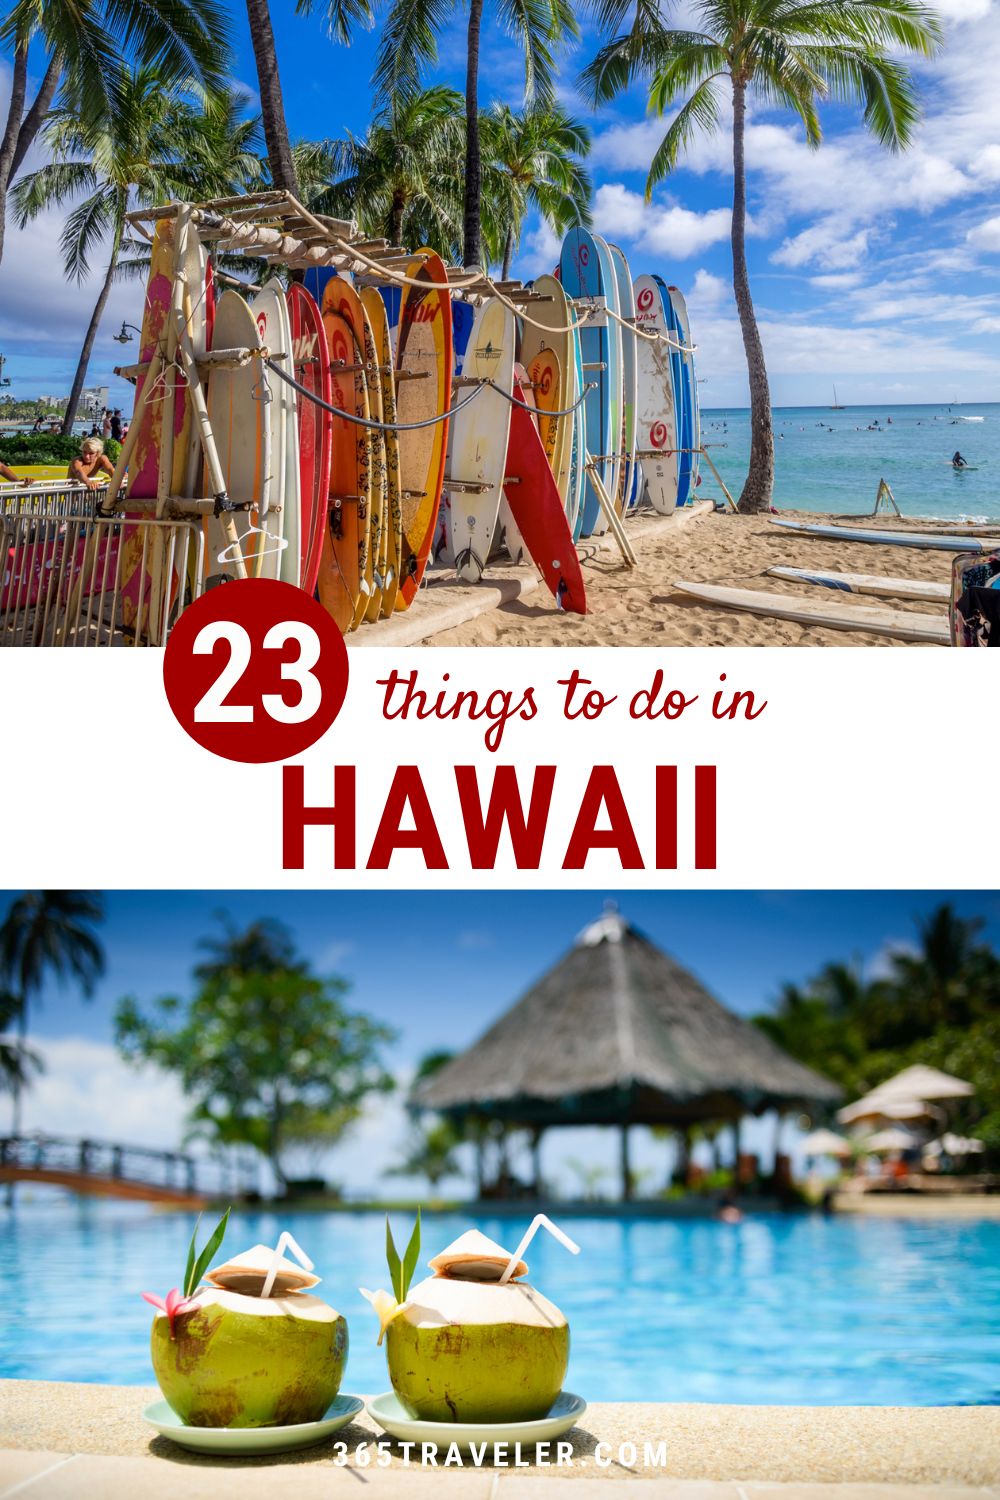 23 Best Things To Do in Hawaii From a Local Who Knows